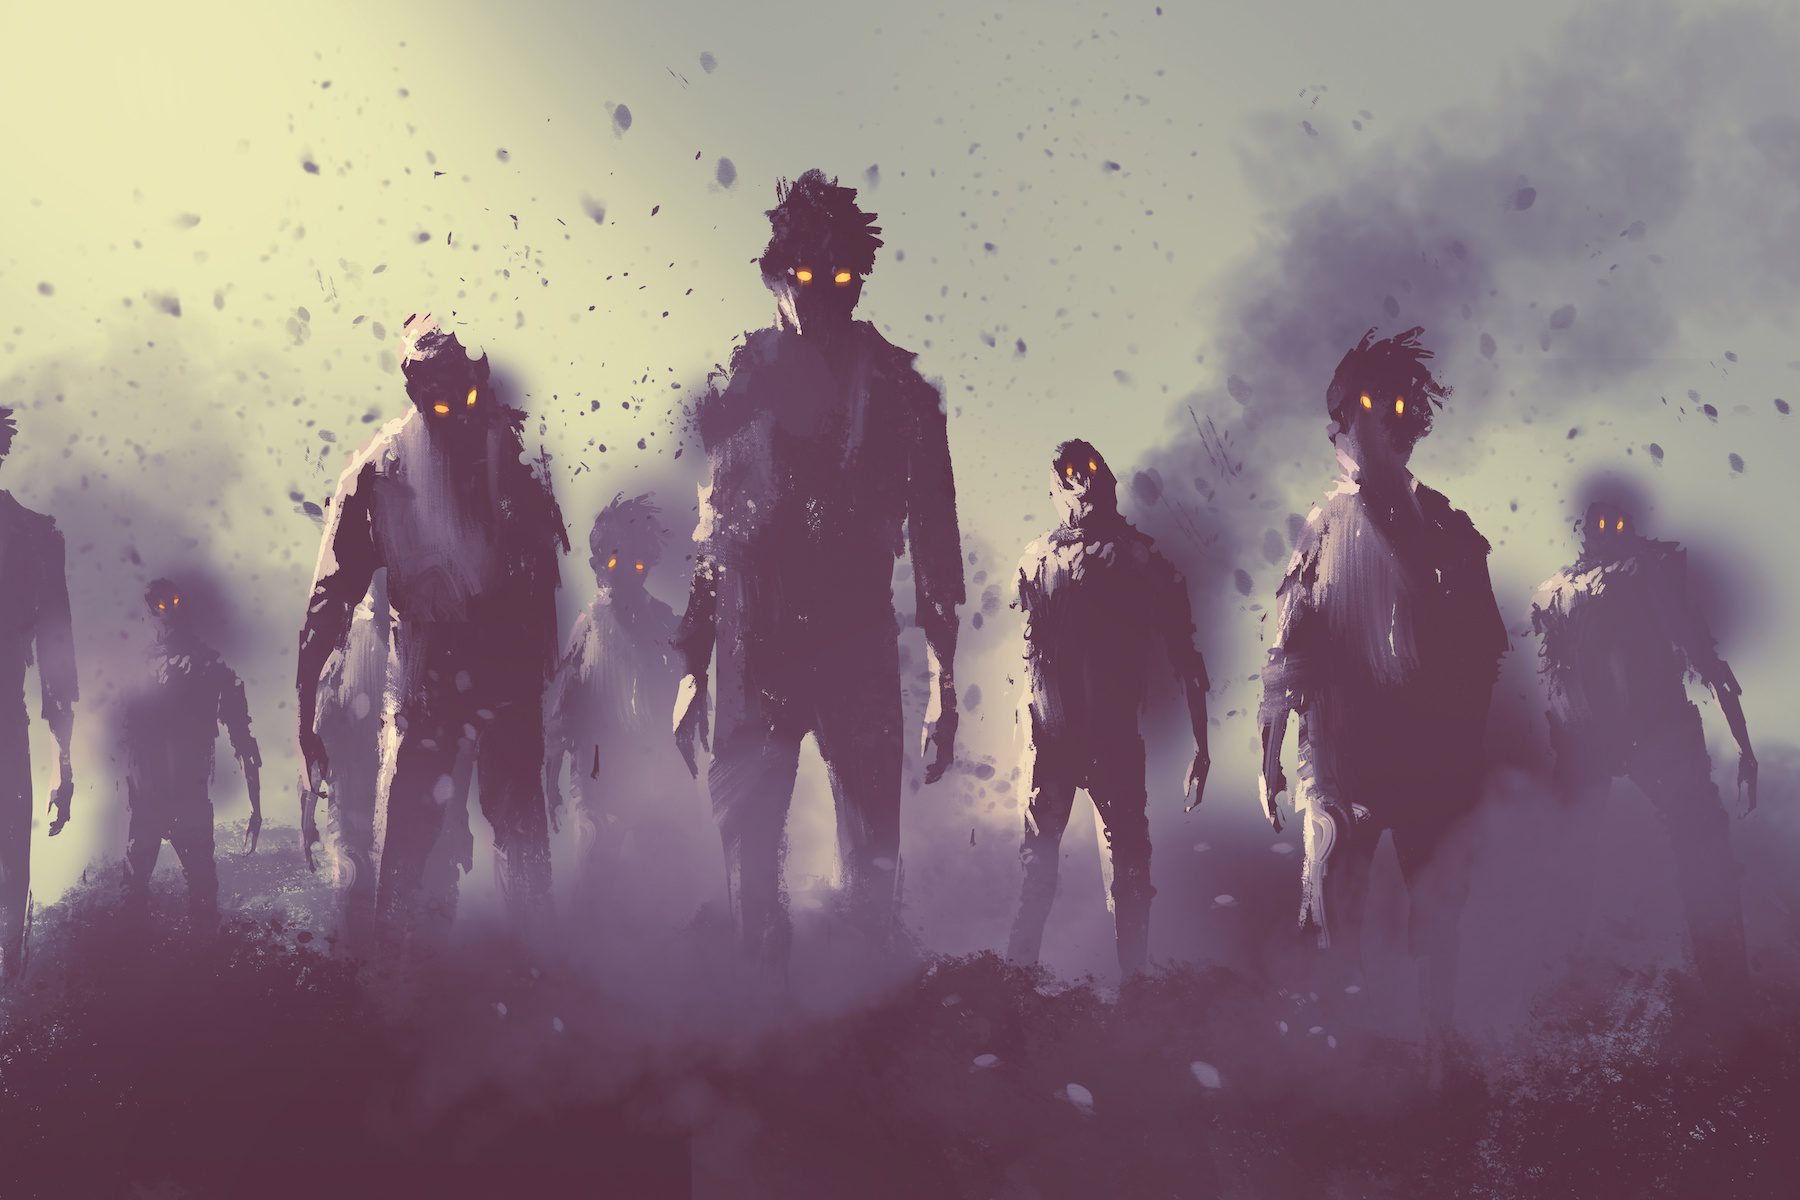 A horde of zombies with red eyes approaching through smoke on a desolate apocalyptic landscape.